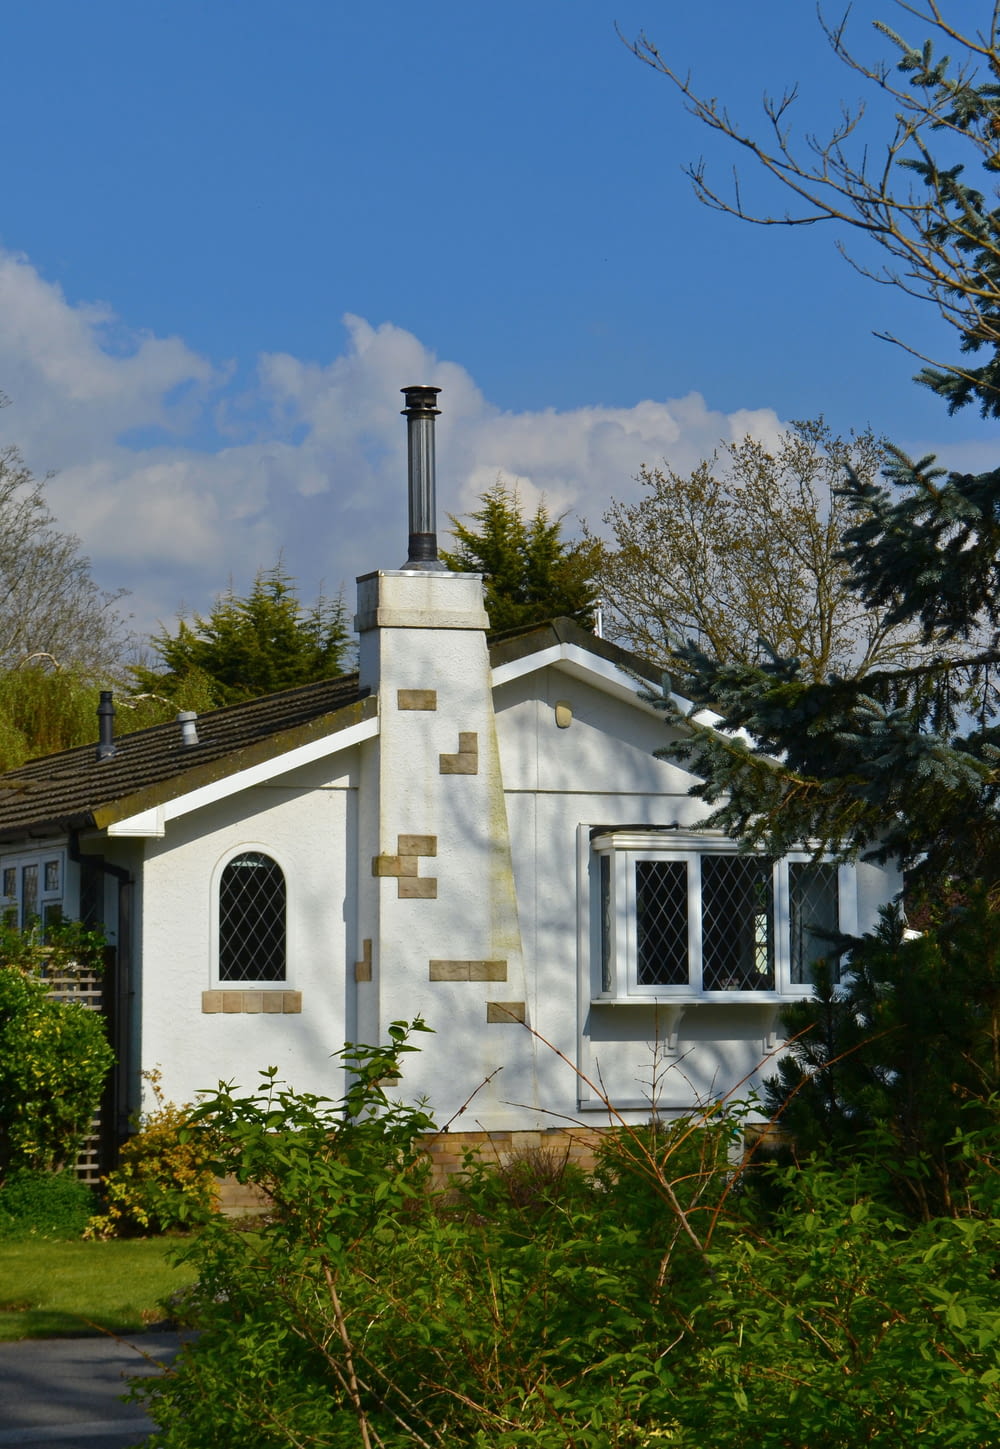 a small white house with a chimney and windows